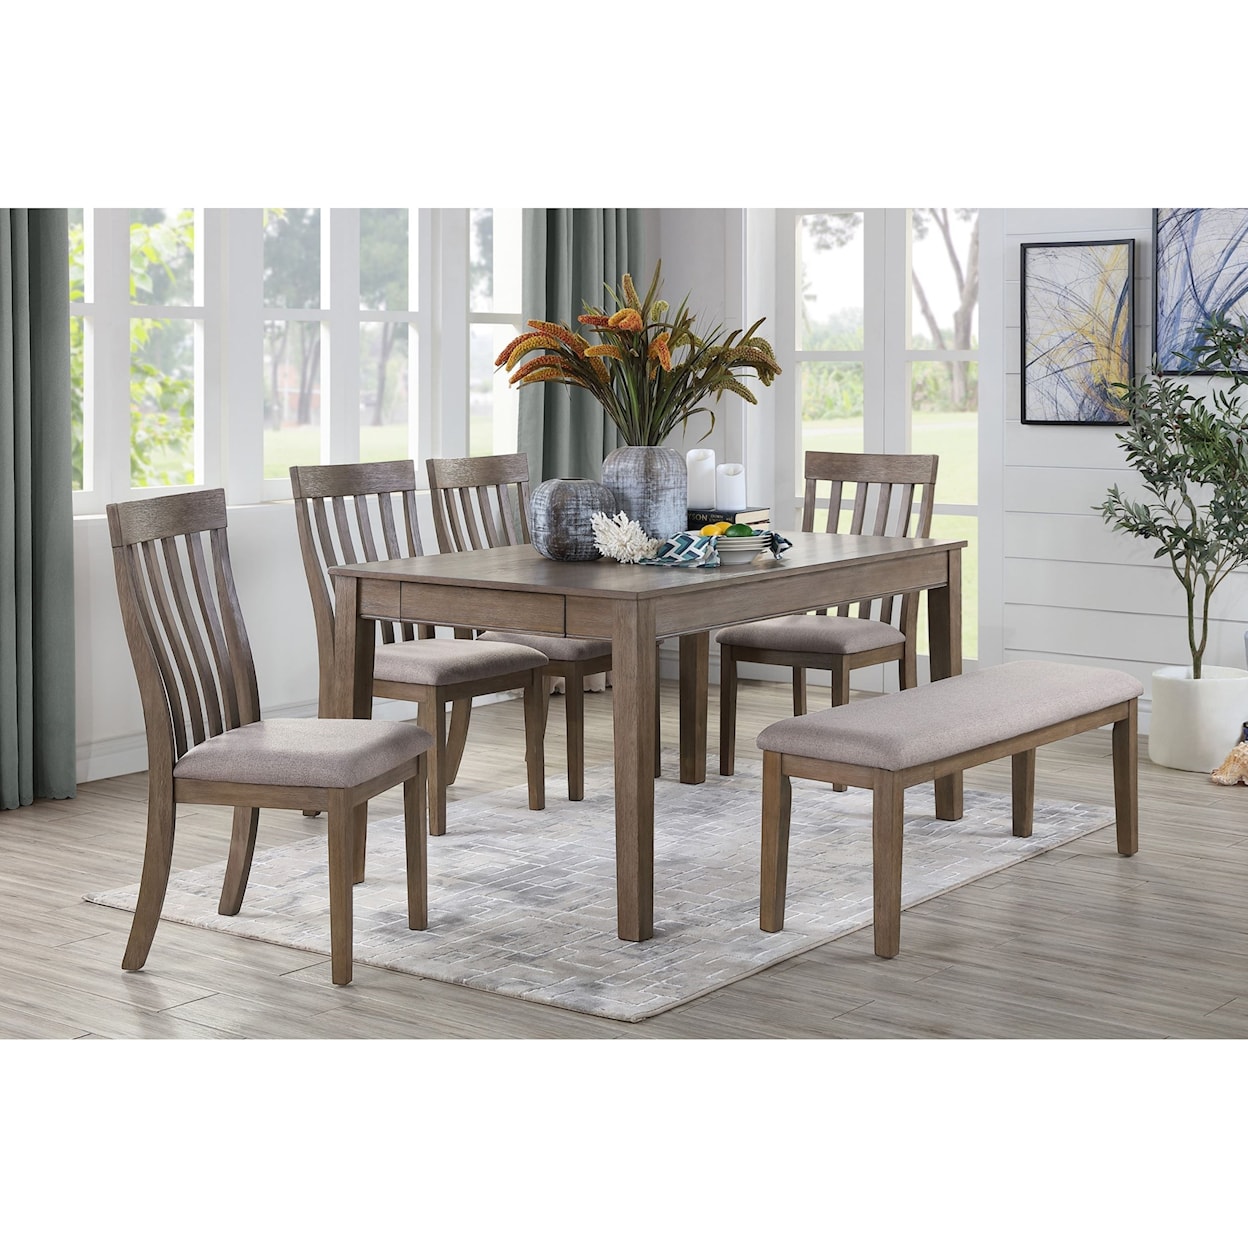 Homelegance Armhurst 6-Piece Table and Chair Set with Bench